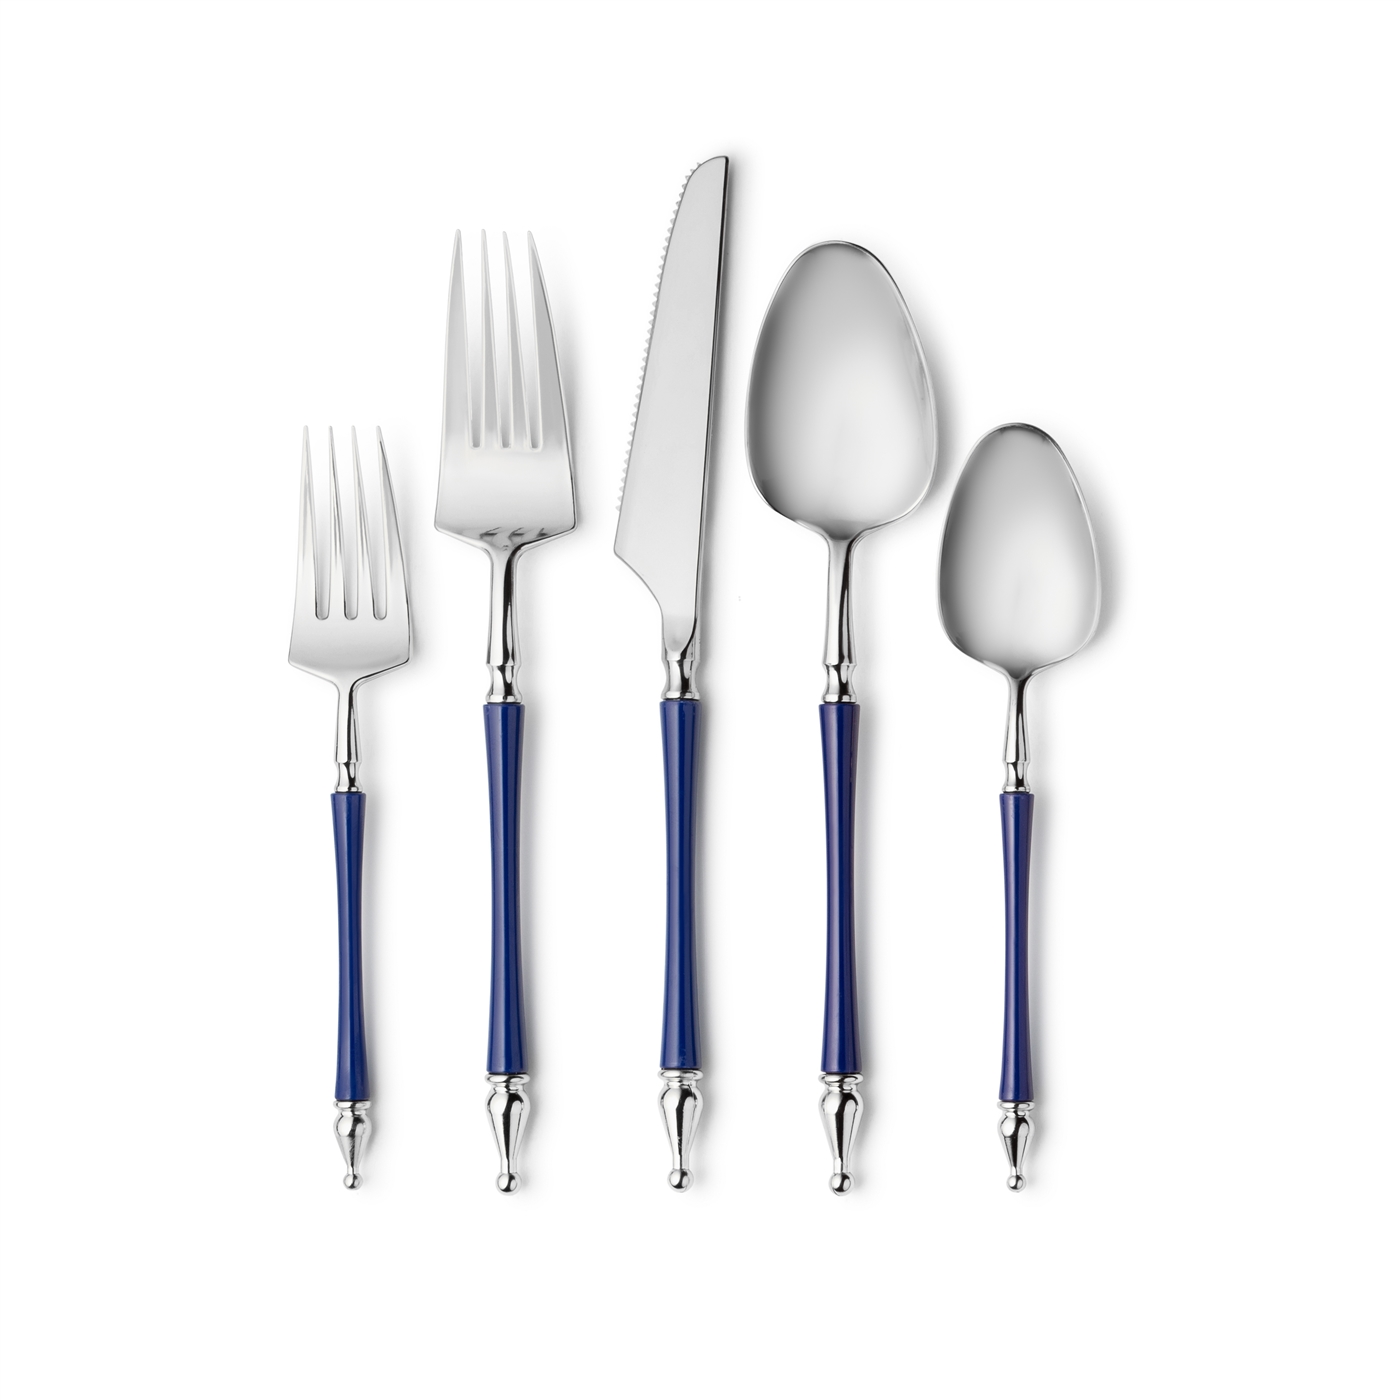 Decor Sophisticate Flatware Collection Silver/Navy Blue-40ct